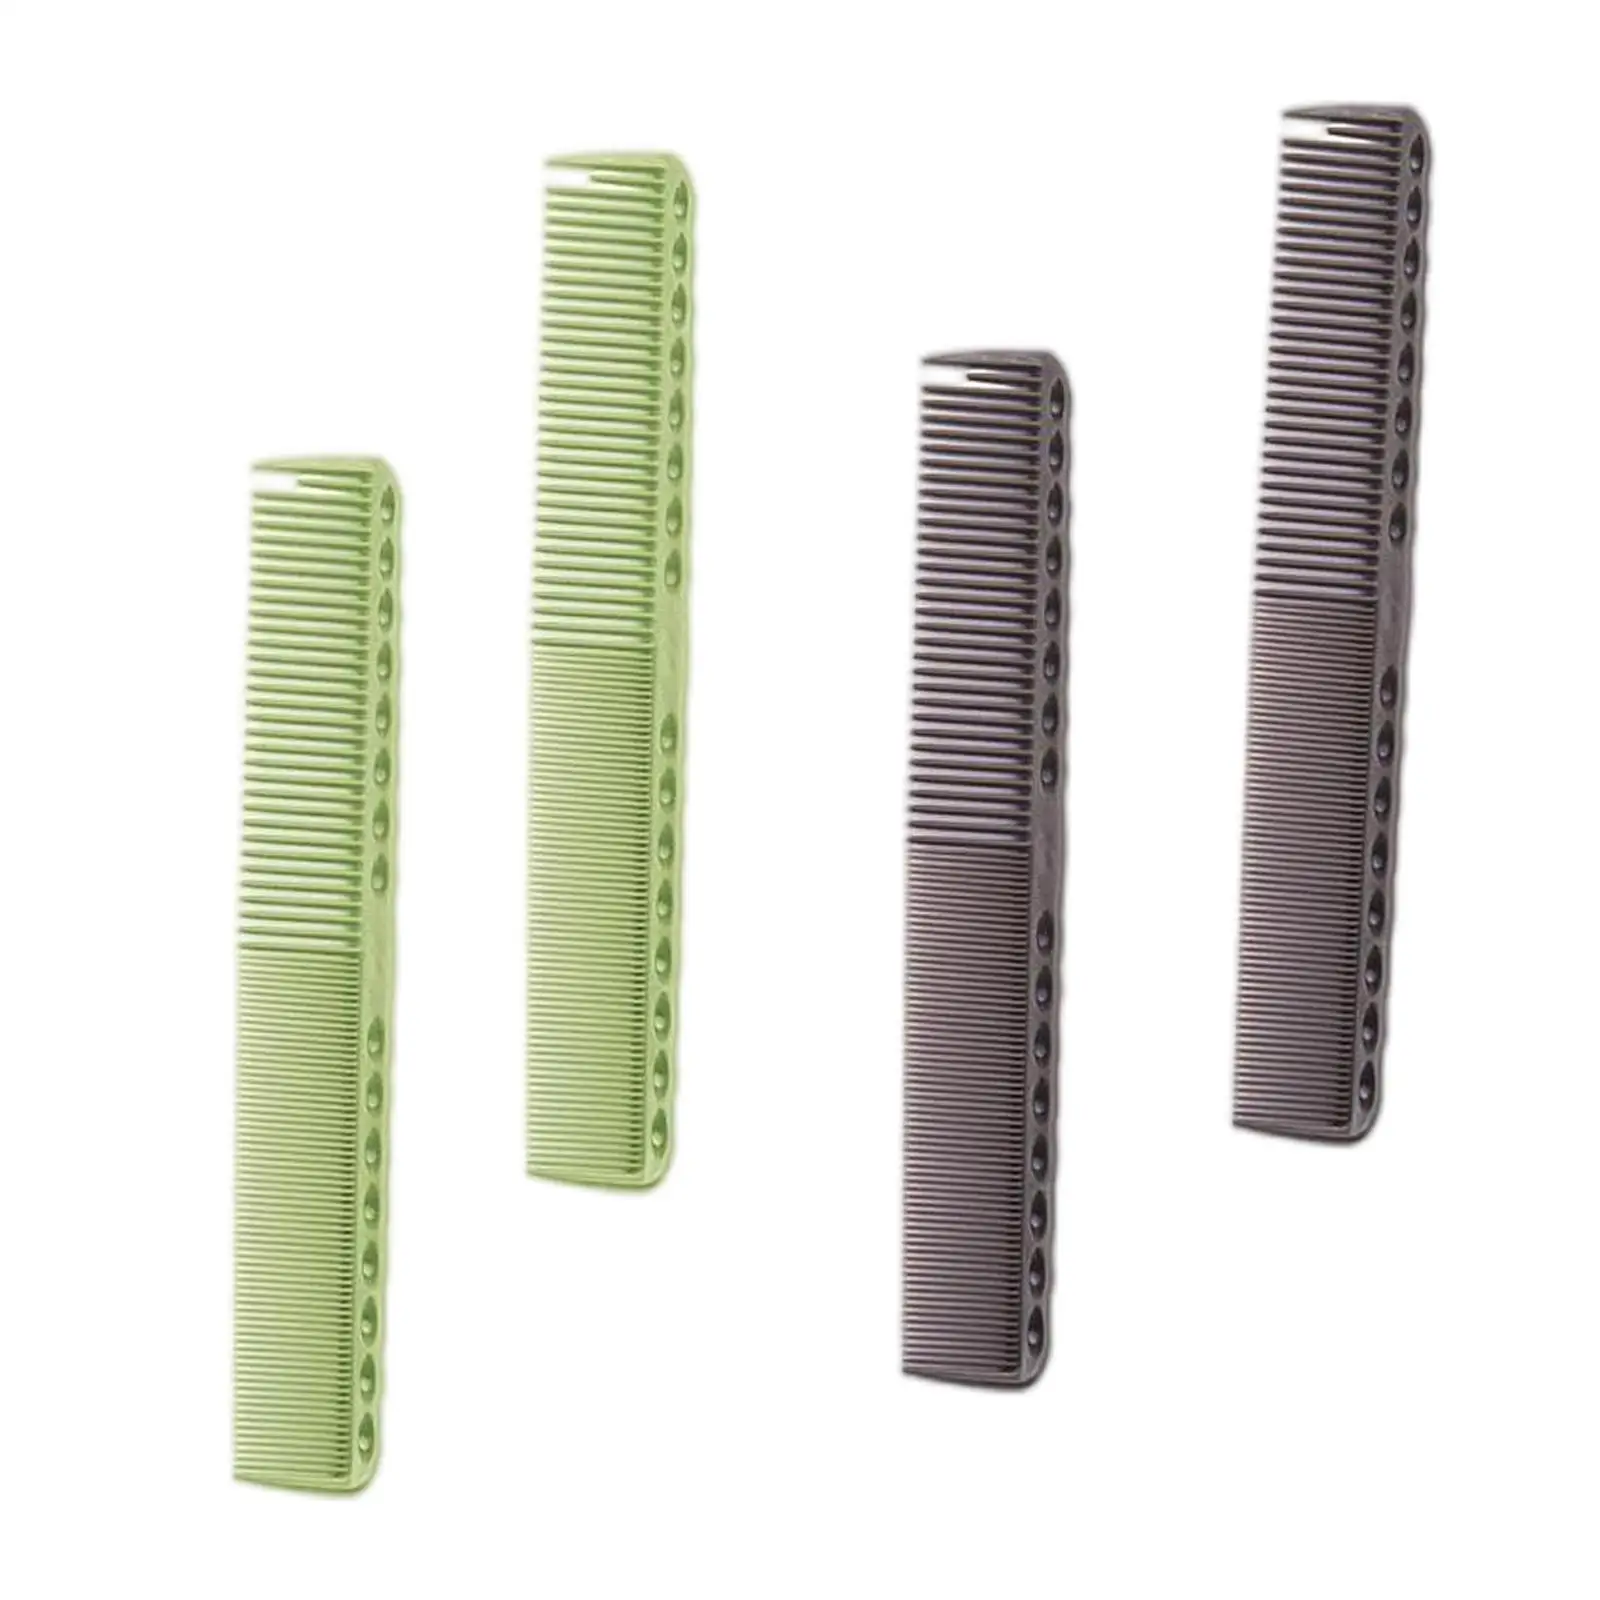 4pcs Professional Barber Hairdressing Comb Hair Cutting Styling Combs Tool